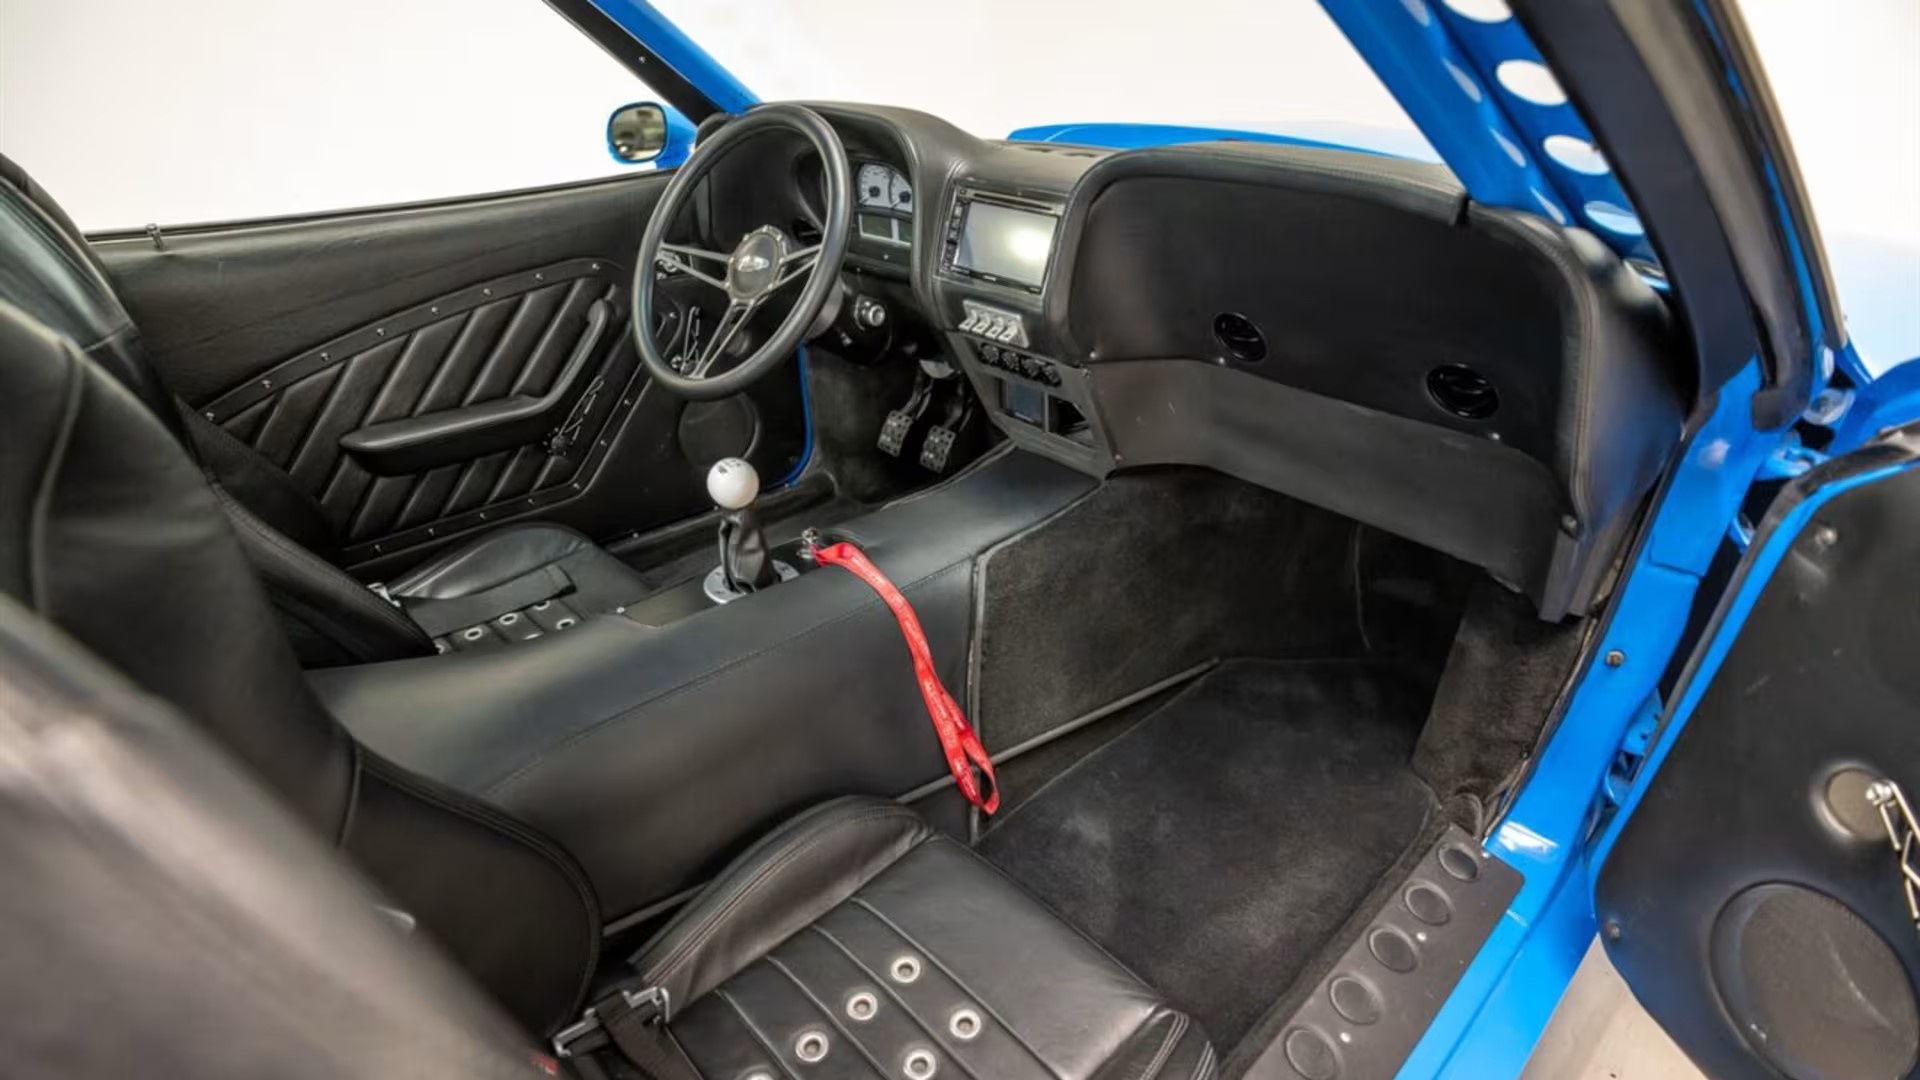 The Interior, Steering, Dashboard, And Central Console Of The 1978 Ford Mustang II 'Phoenix' (Credits Mecum Auctions)